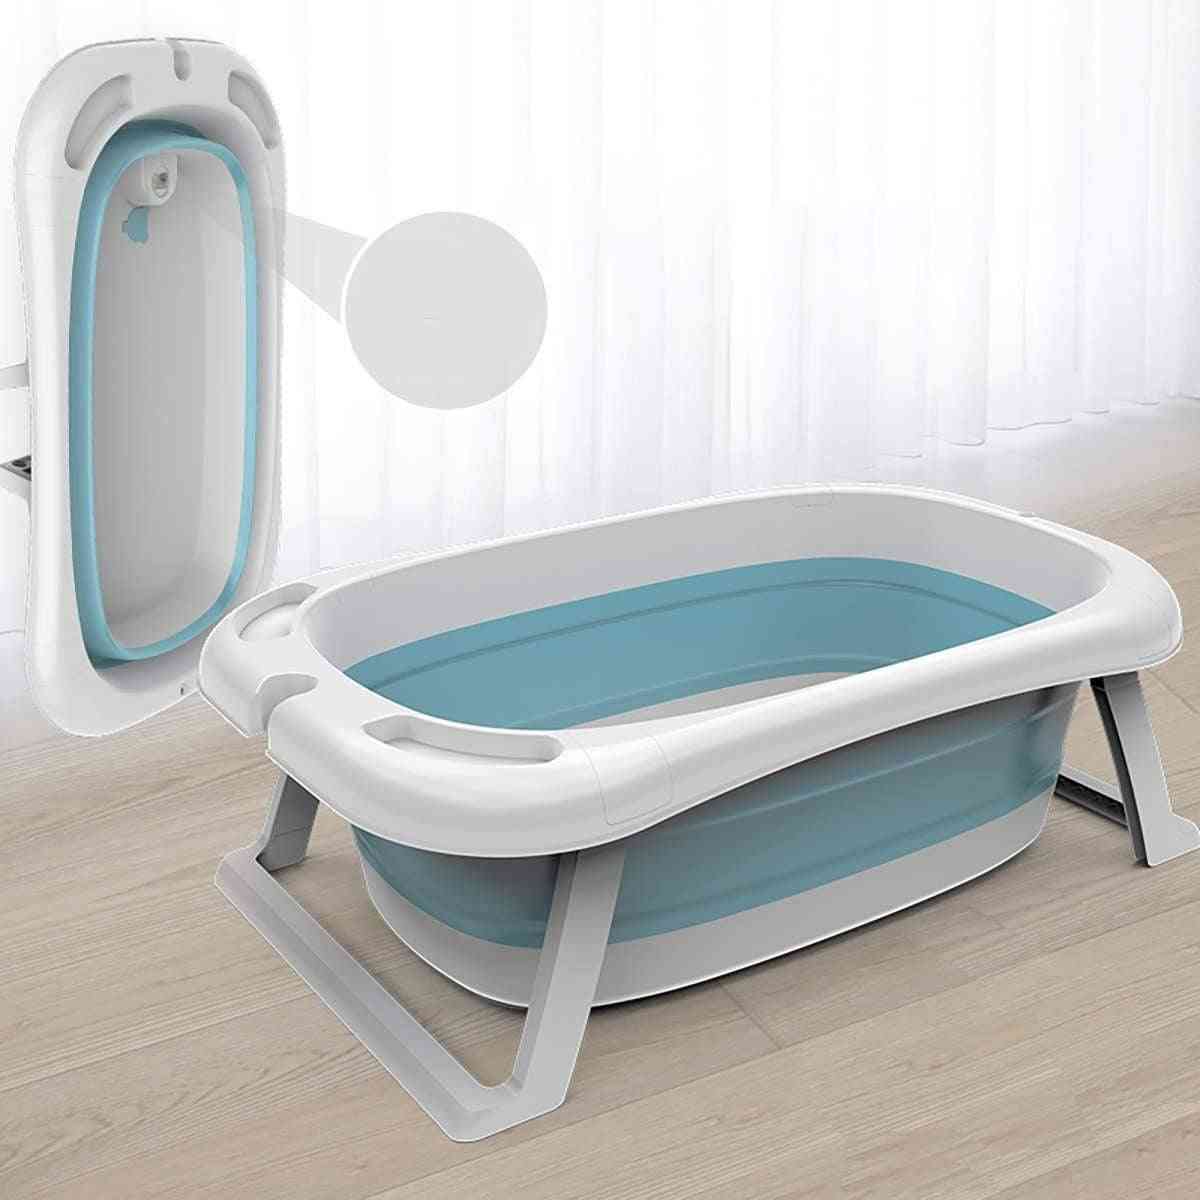 Portable- Folding Baby Shower, Basin Cushion, Pad Bathtub With Thermometer